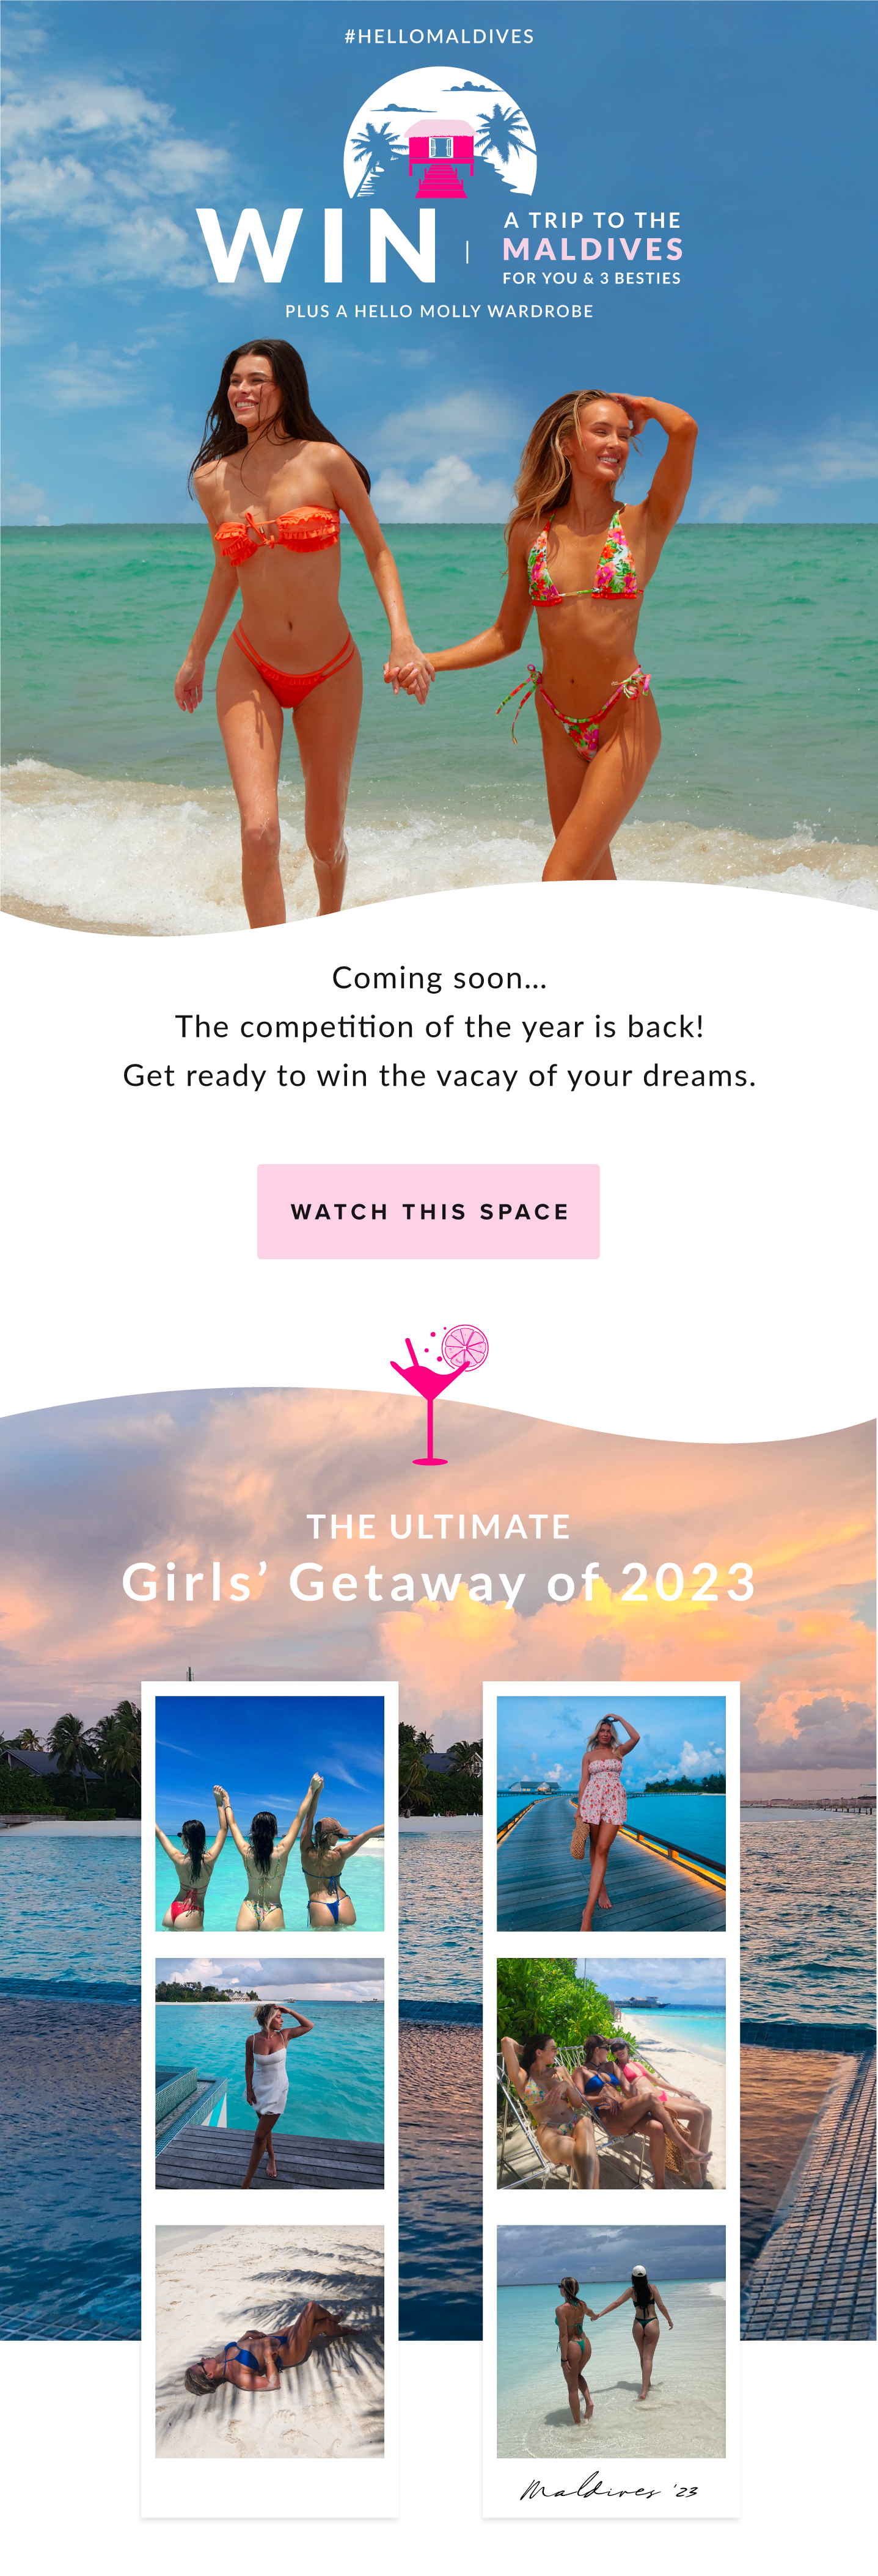 Watch this space! The competition of the year is coming back. Get ready to Win a trip to the Maldives for you & 3 besties PLUS a Hello Molly wardrobe.